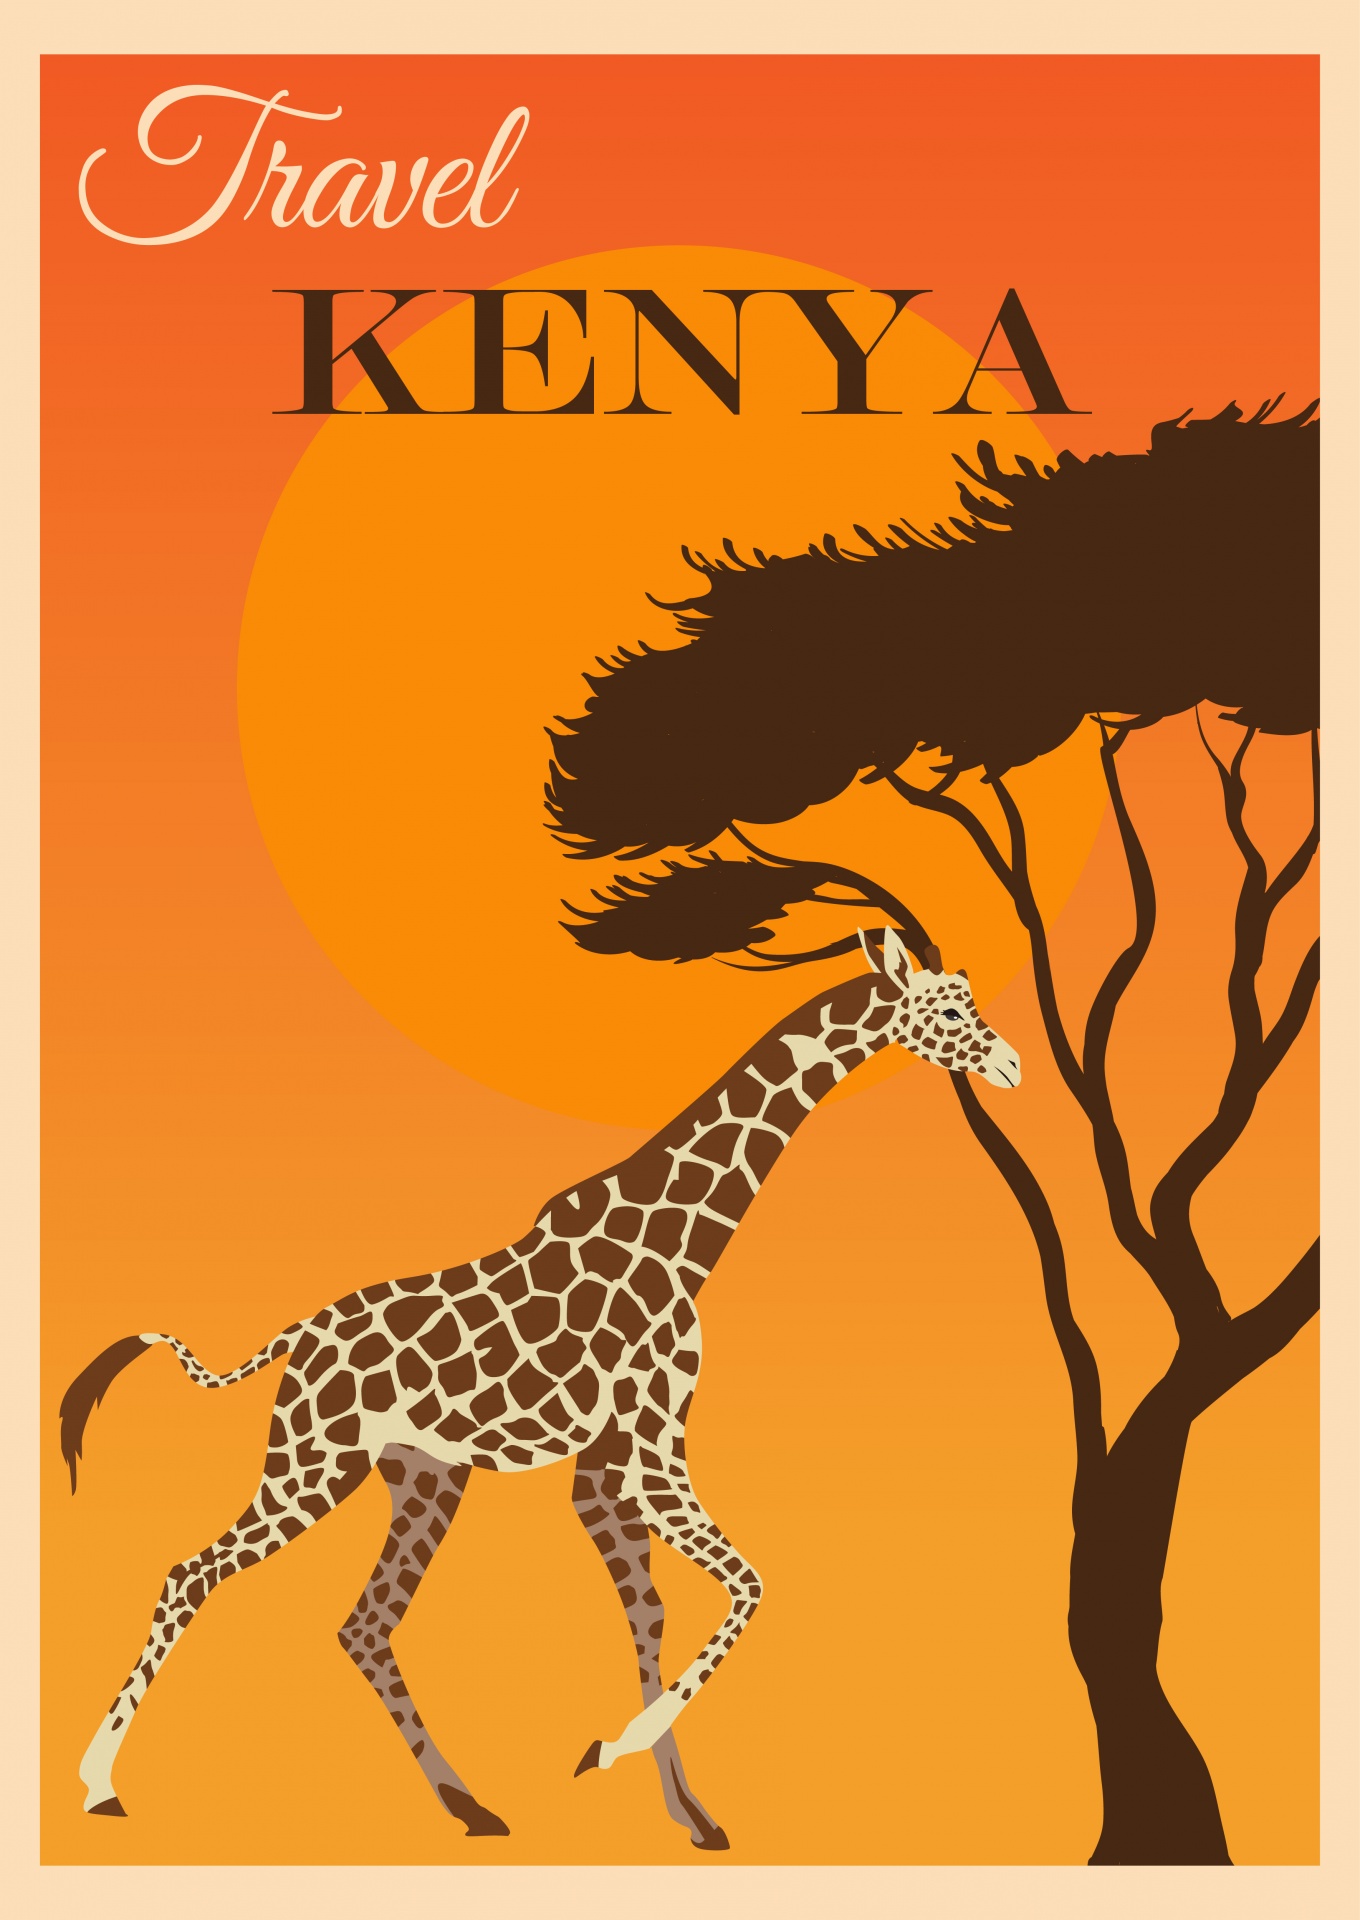 Modern retro, vintage style travel poster for Kenya, Africa with sunset, giraffe and acacia tree